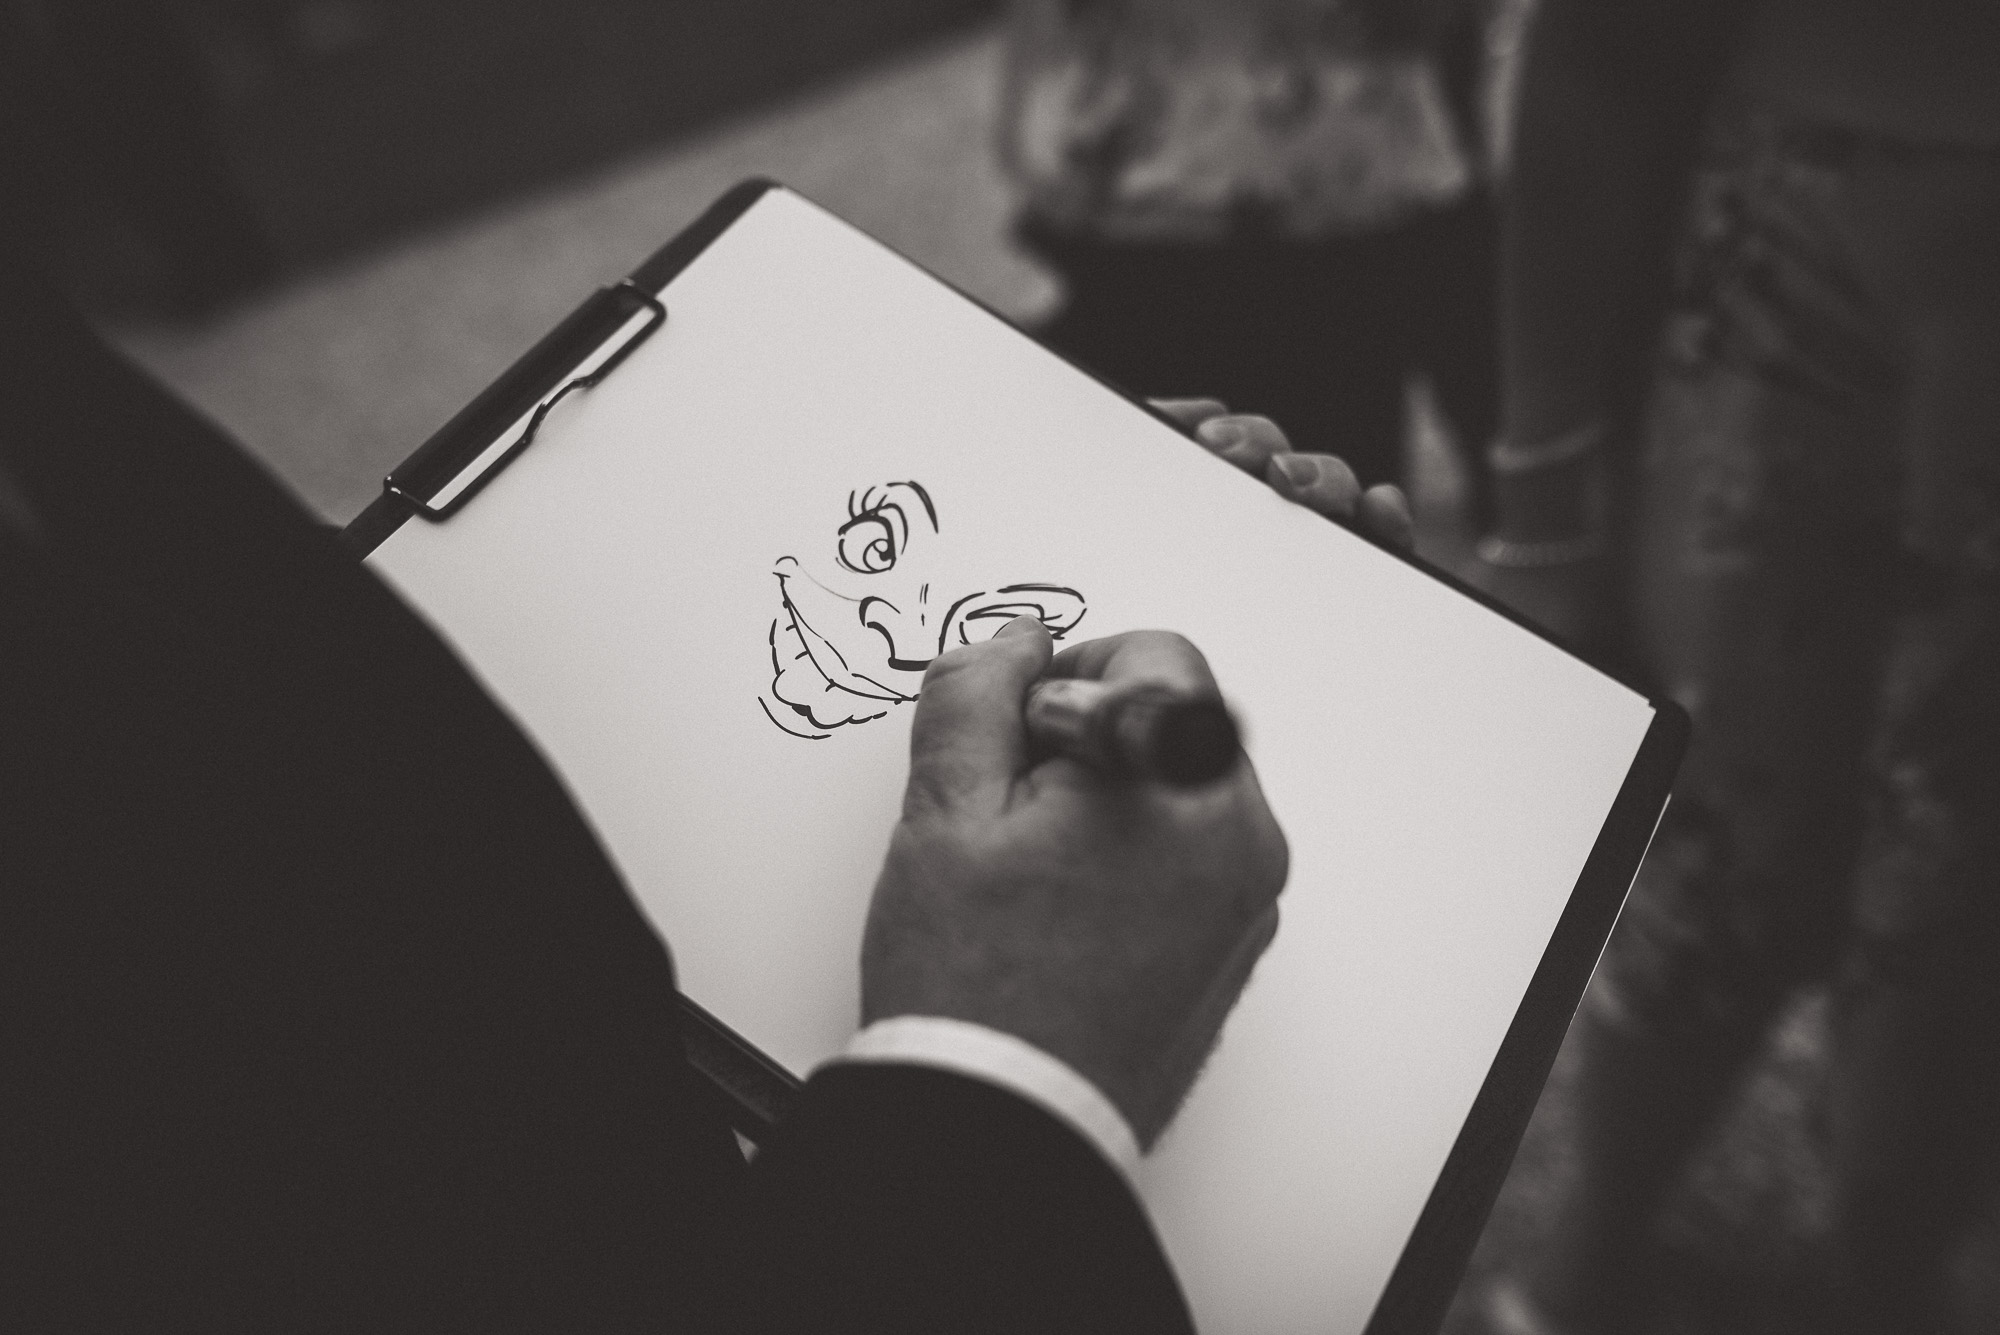 A groom sketching a face on a piece of paper.